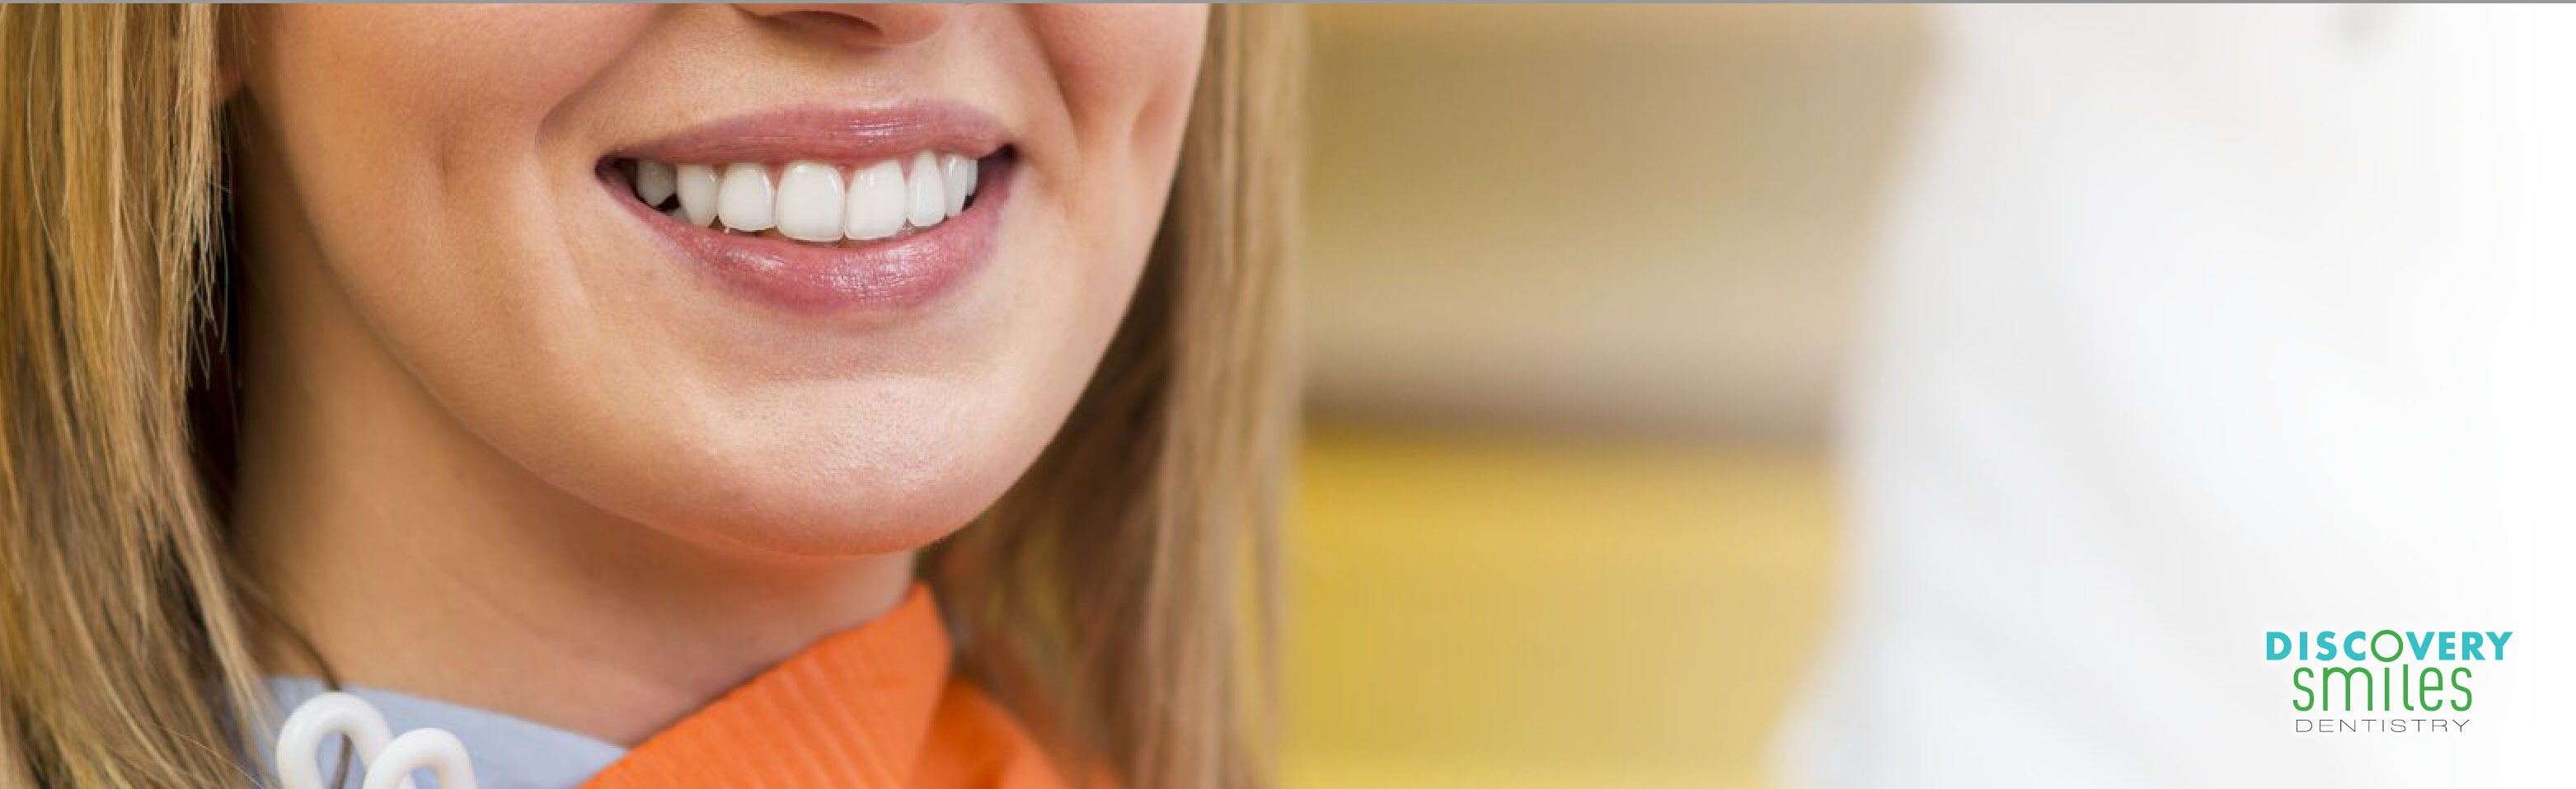 A woman with a beautiful smile portrays the concept of results after seeing a cosmetic dentist in Tucson.